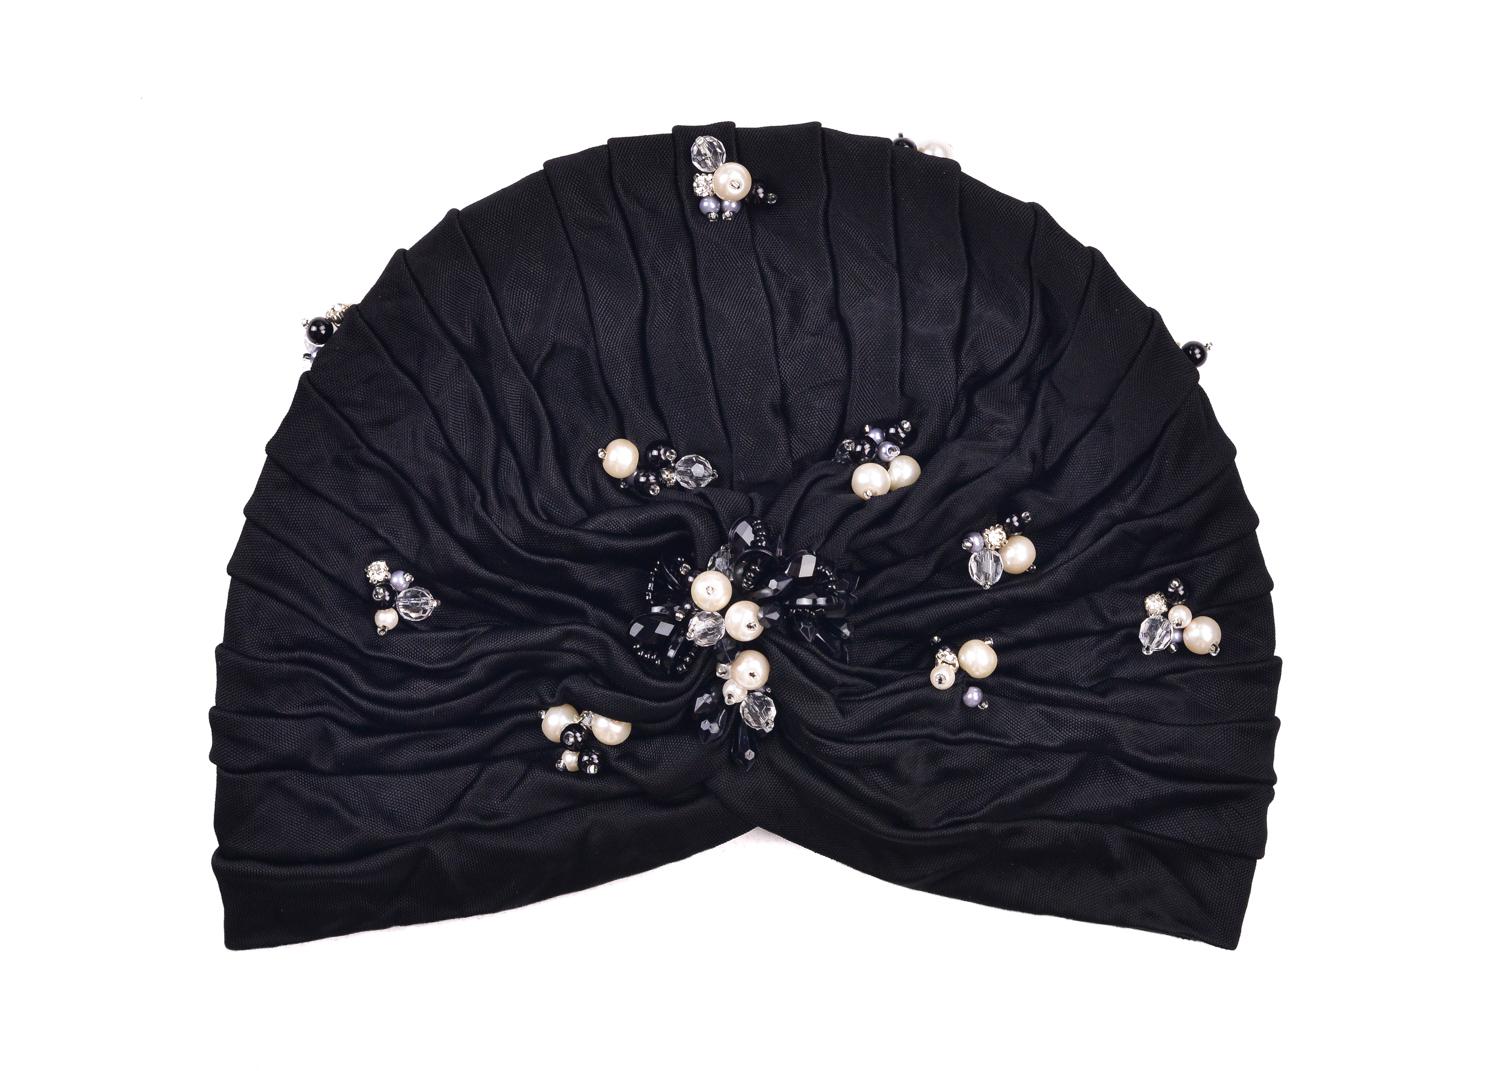 Be one with artistic rarity with Roberto Cavalli's Soft Pearled Turban. This head piece features sleek pearls, chiseled transparent stones, and grey and black micro pearl appliques across a tiered body. You can wear this evening classic before or